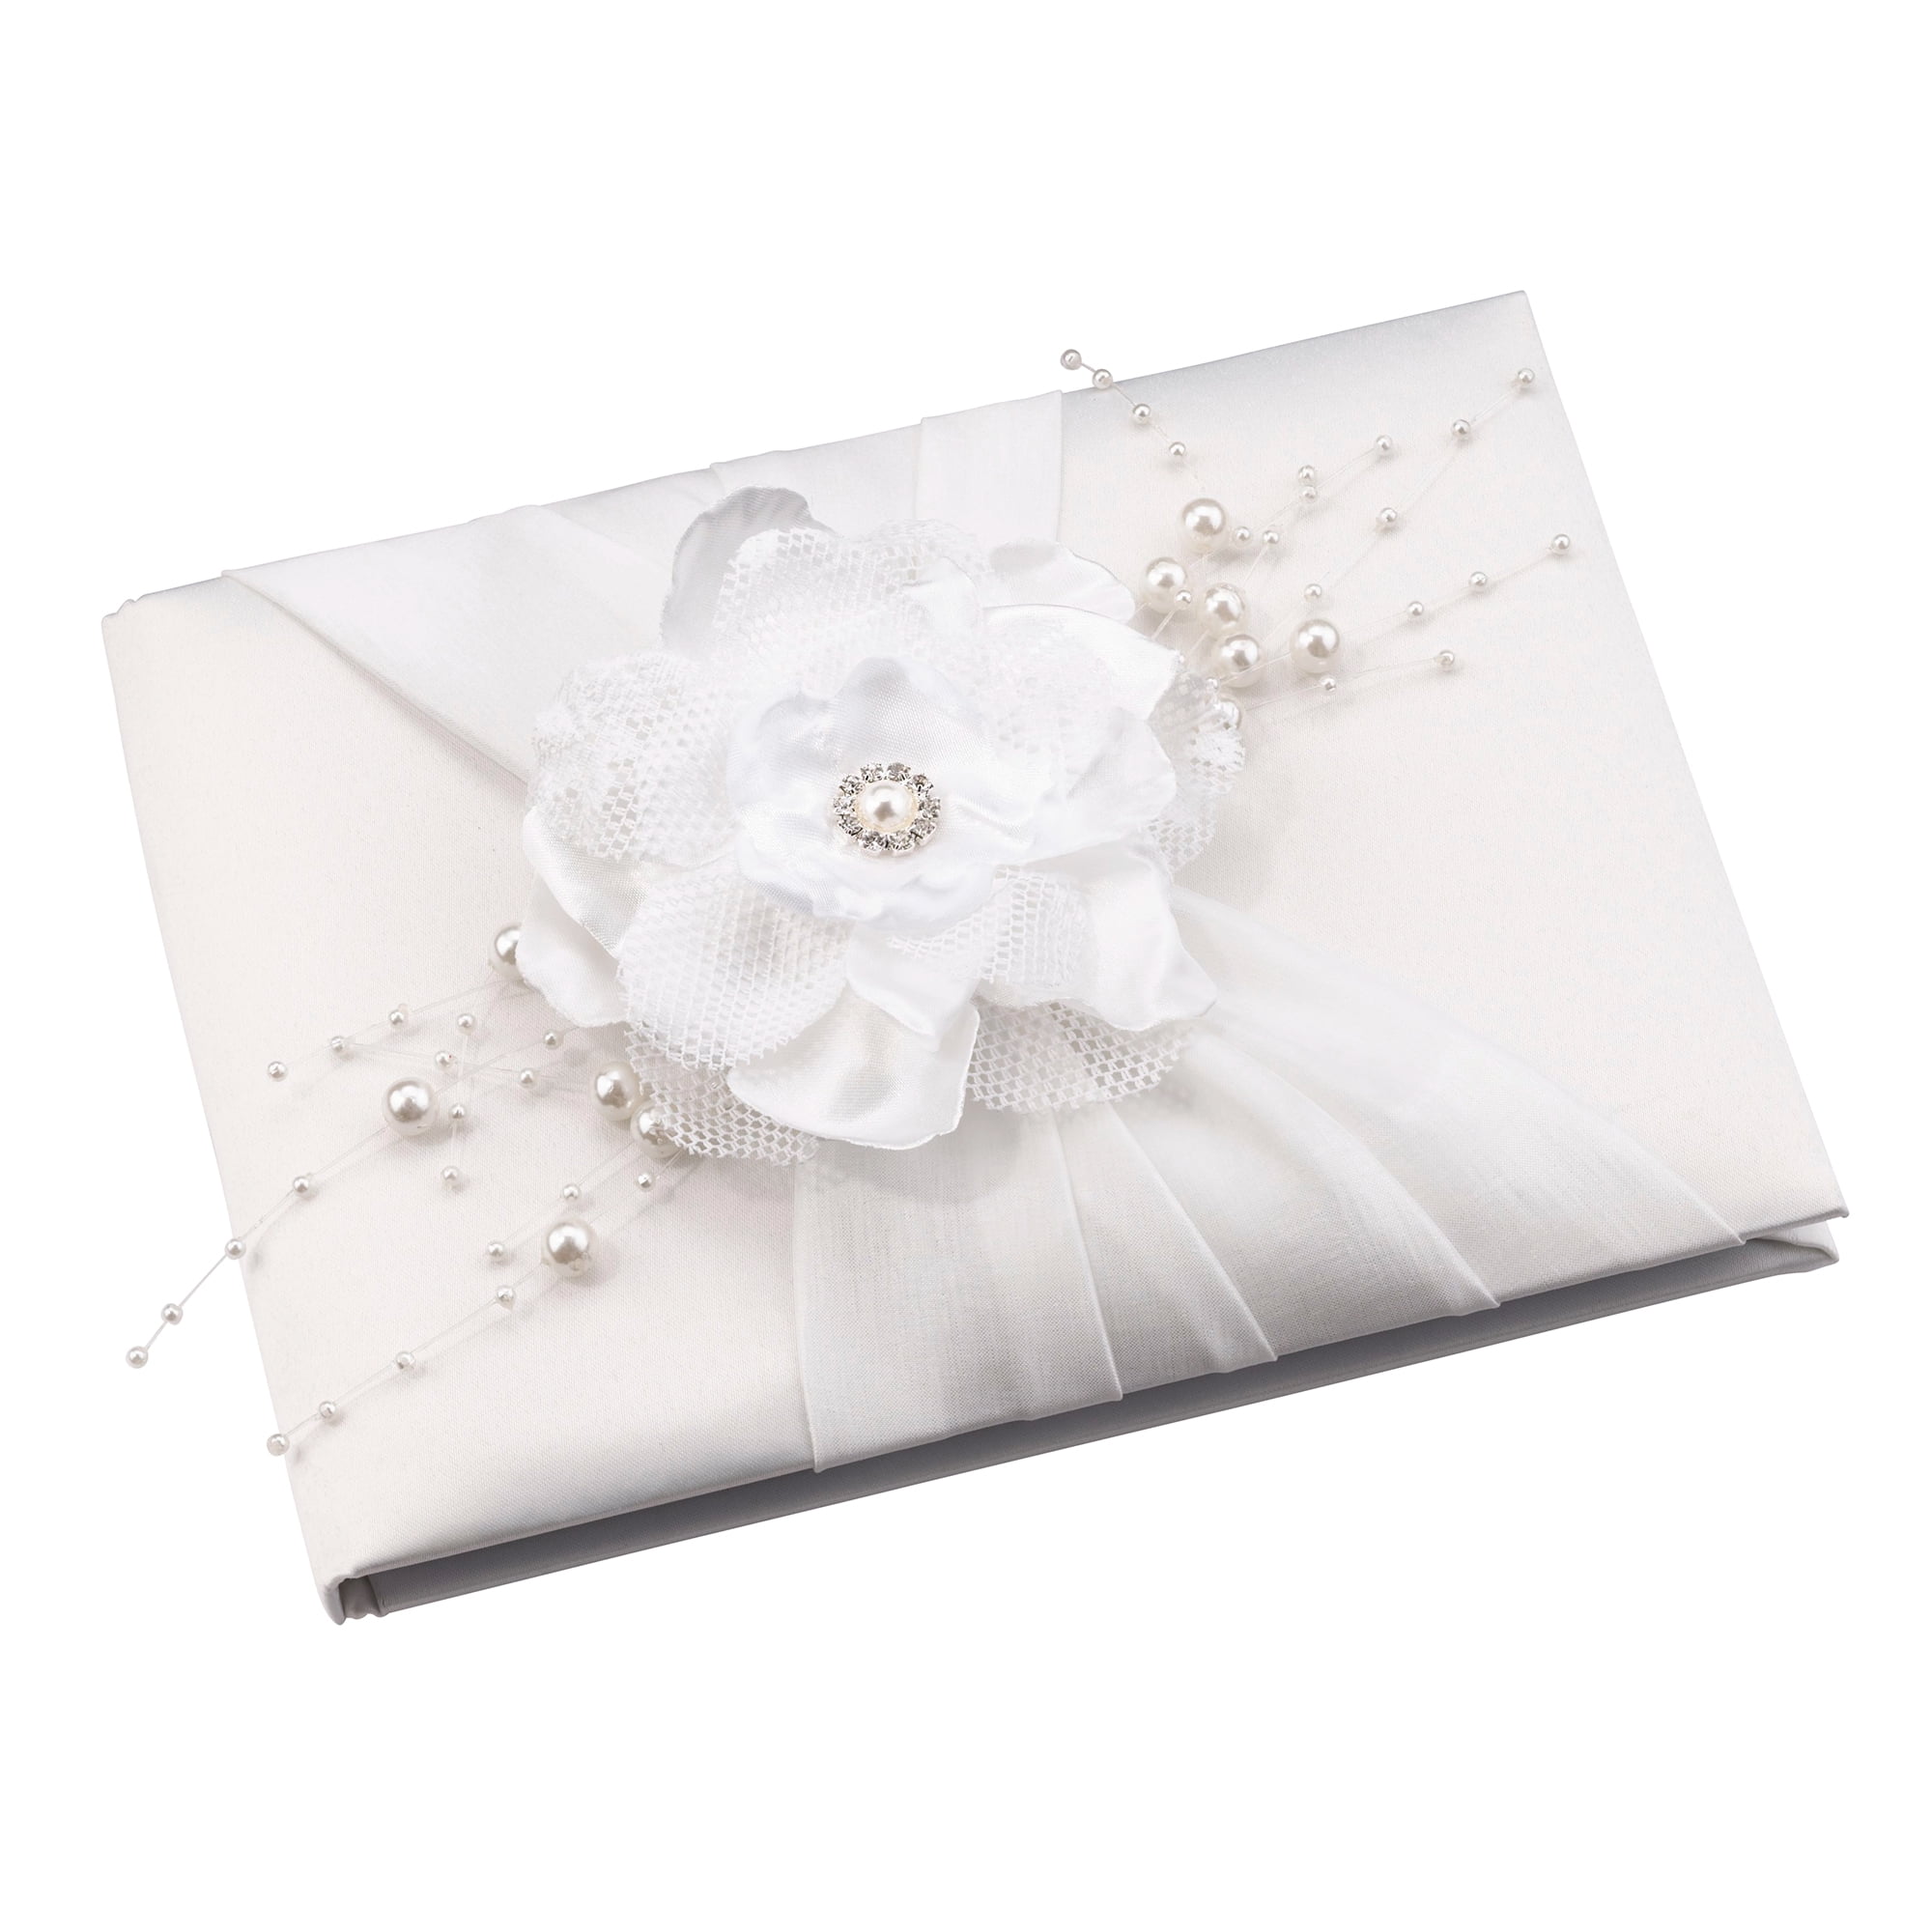 White Sash Wedding Guest Book and Pen Set with Bowknot Reception Signatures 